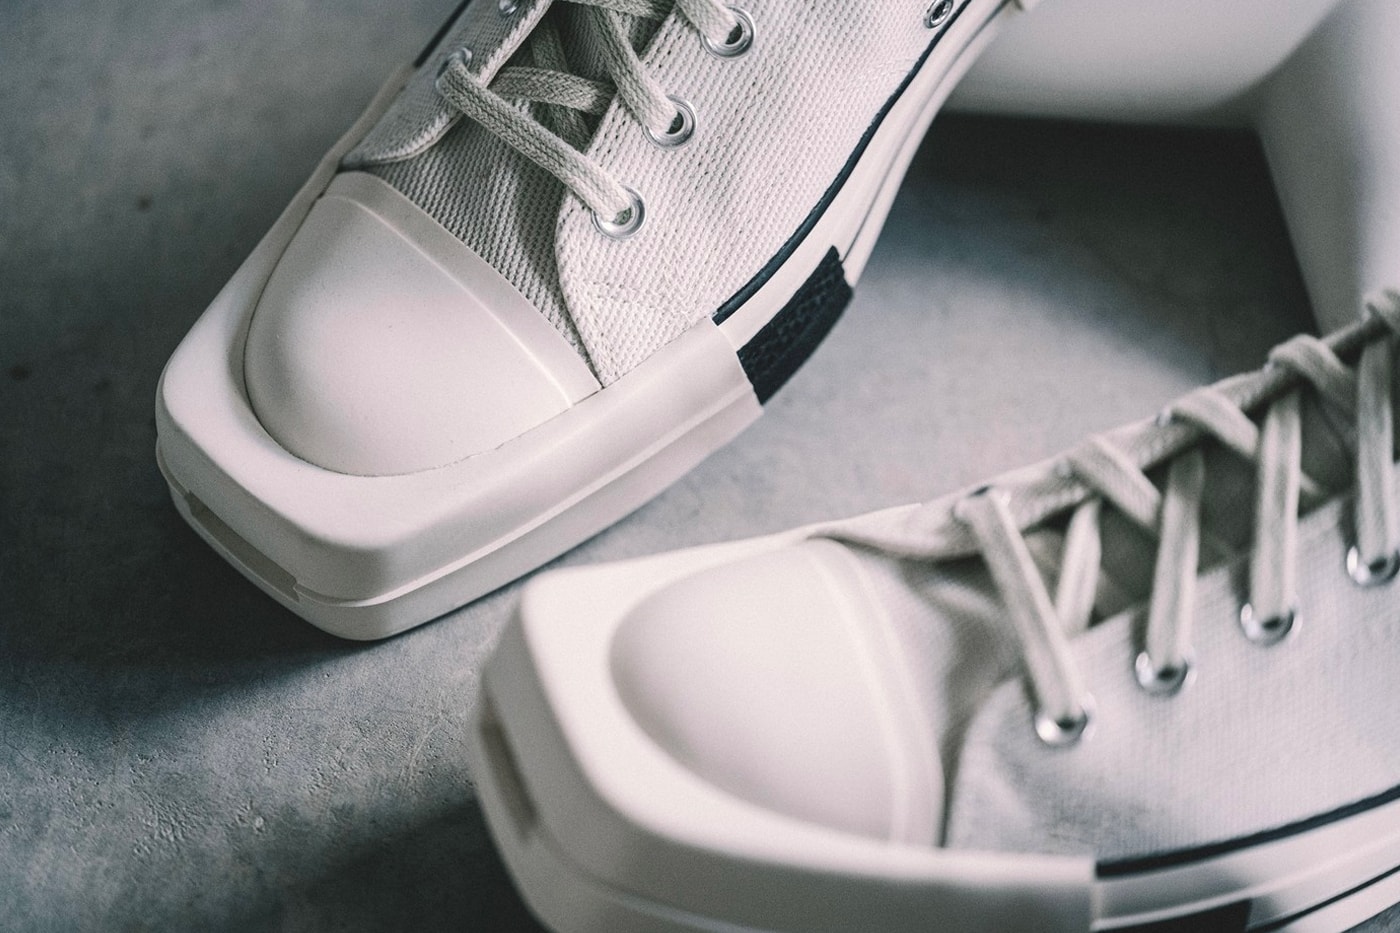 Converse Rick Owens DRKSHDW TurboDrk Chuck 70 Ox Low Closer Look Release Info White Date Buy Price